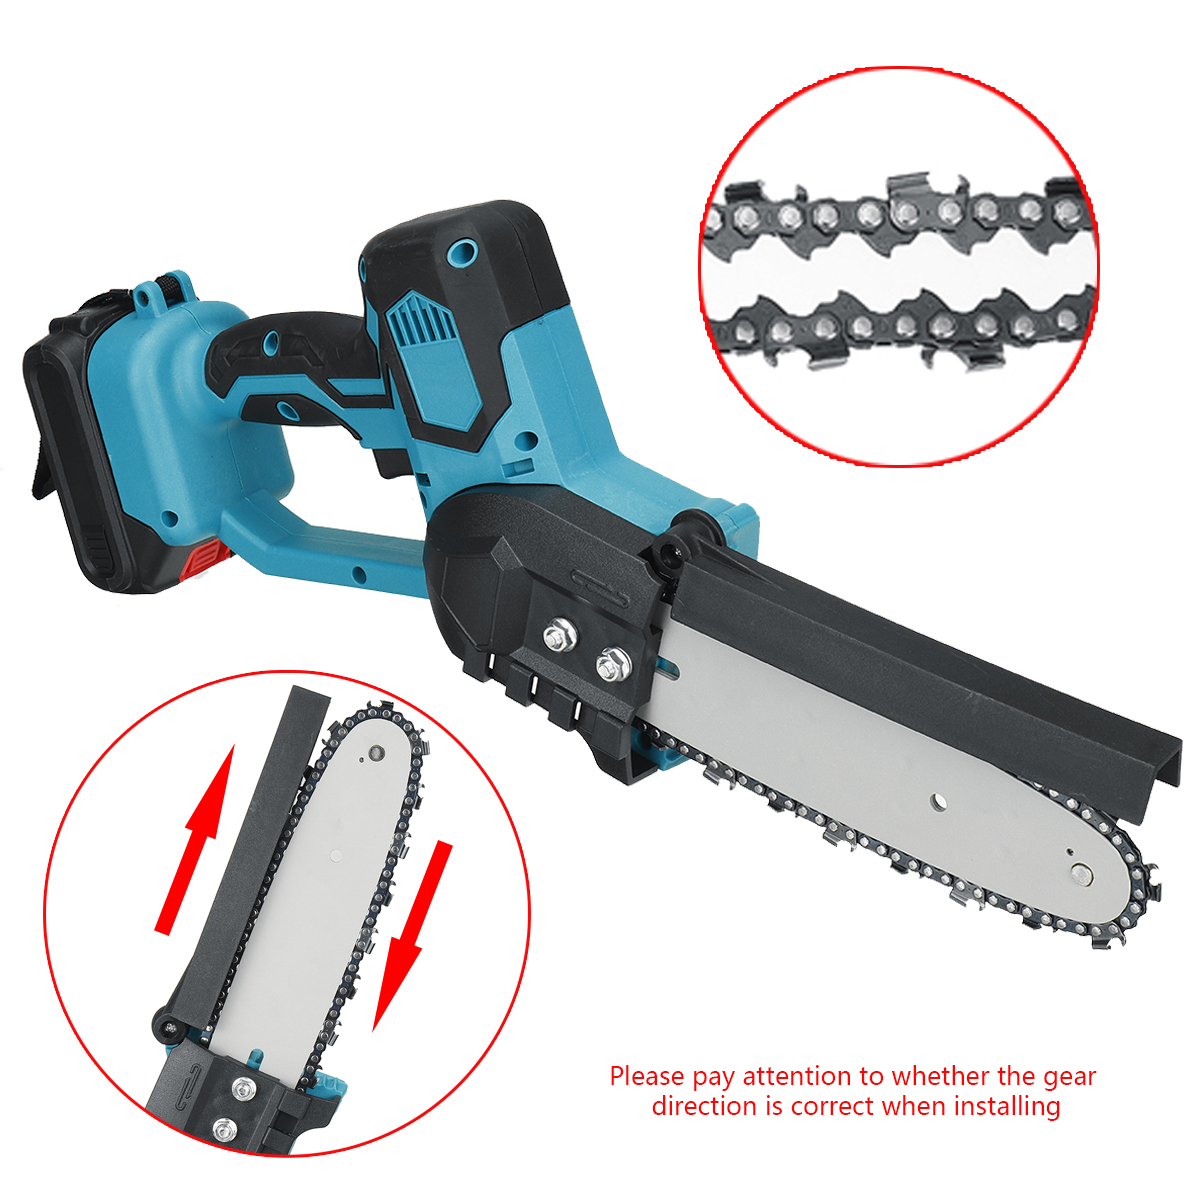 8Inch-21V-Cordless-Electric-Chain-Saw-Mini-Wood-Cutter-1200W-One-Hand-Saws-Woodworking-Tool-W-None12-1860320-4